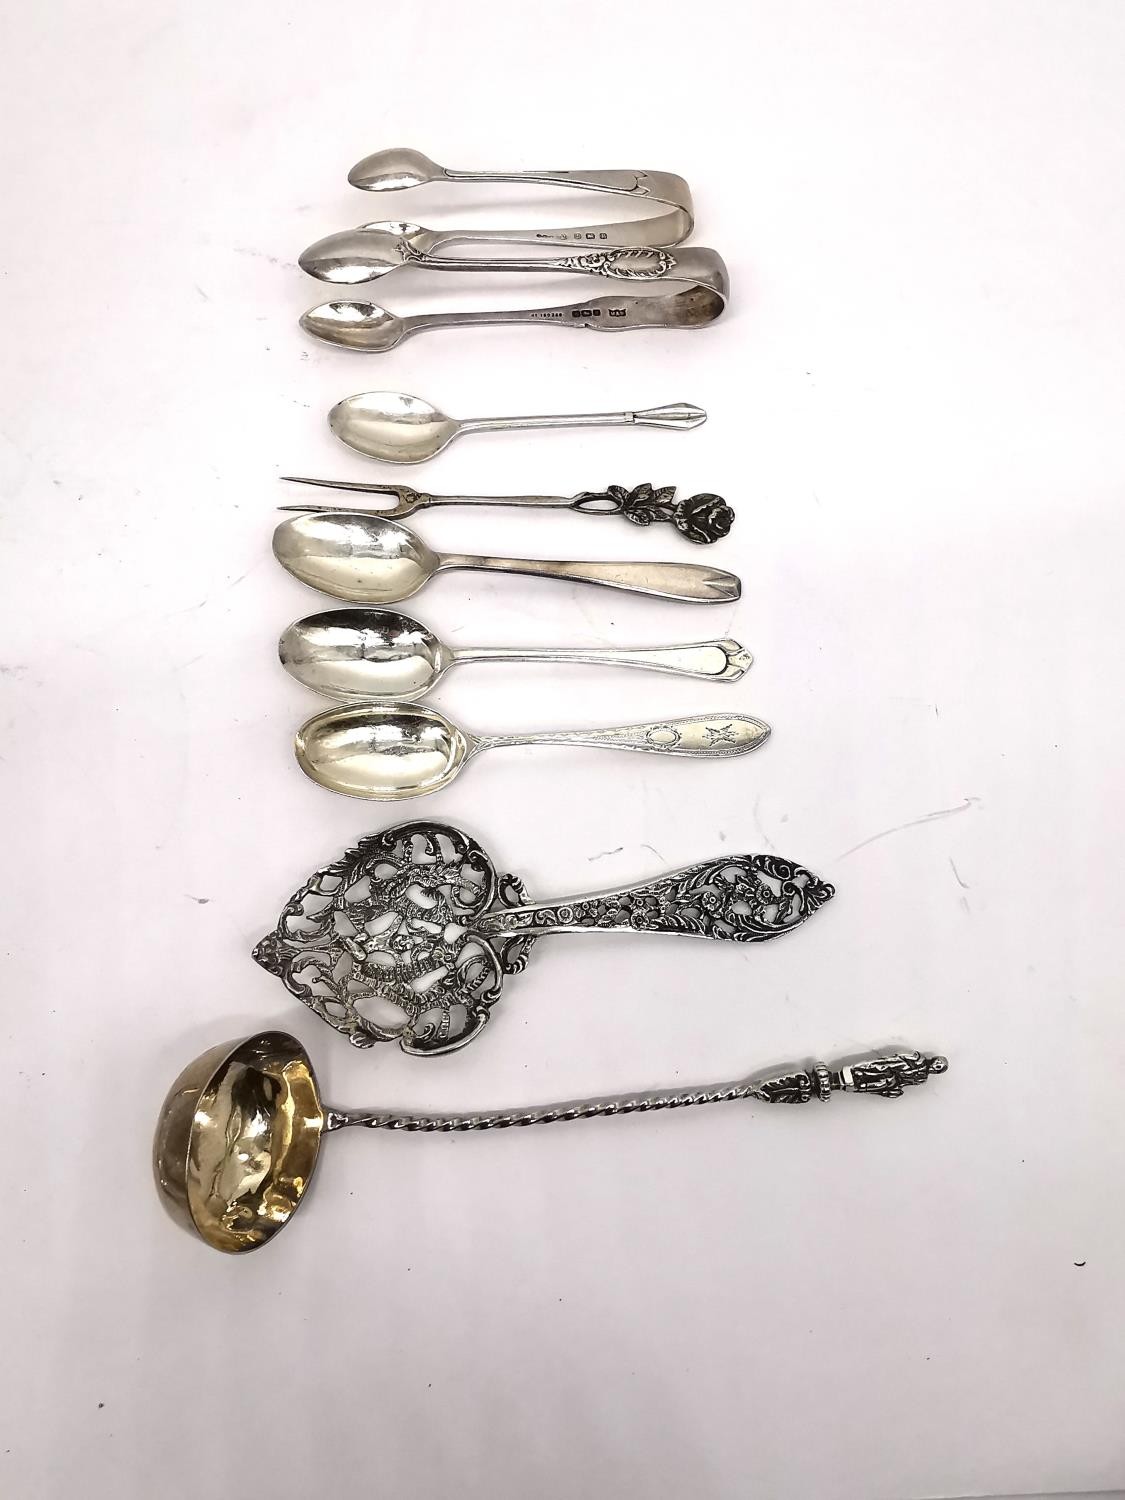 A collection of silver teaspoons, two pairs of sugar tongs, a pickle fork, a small sauce ladle and a - Image 15 of 16